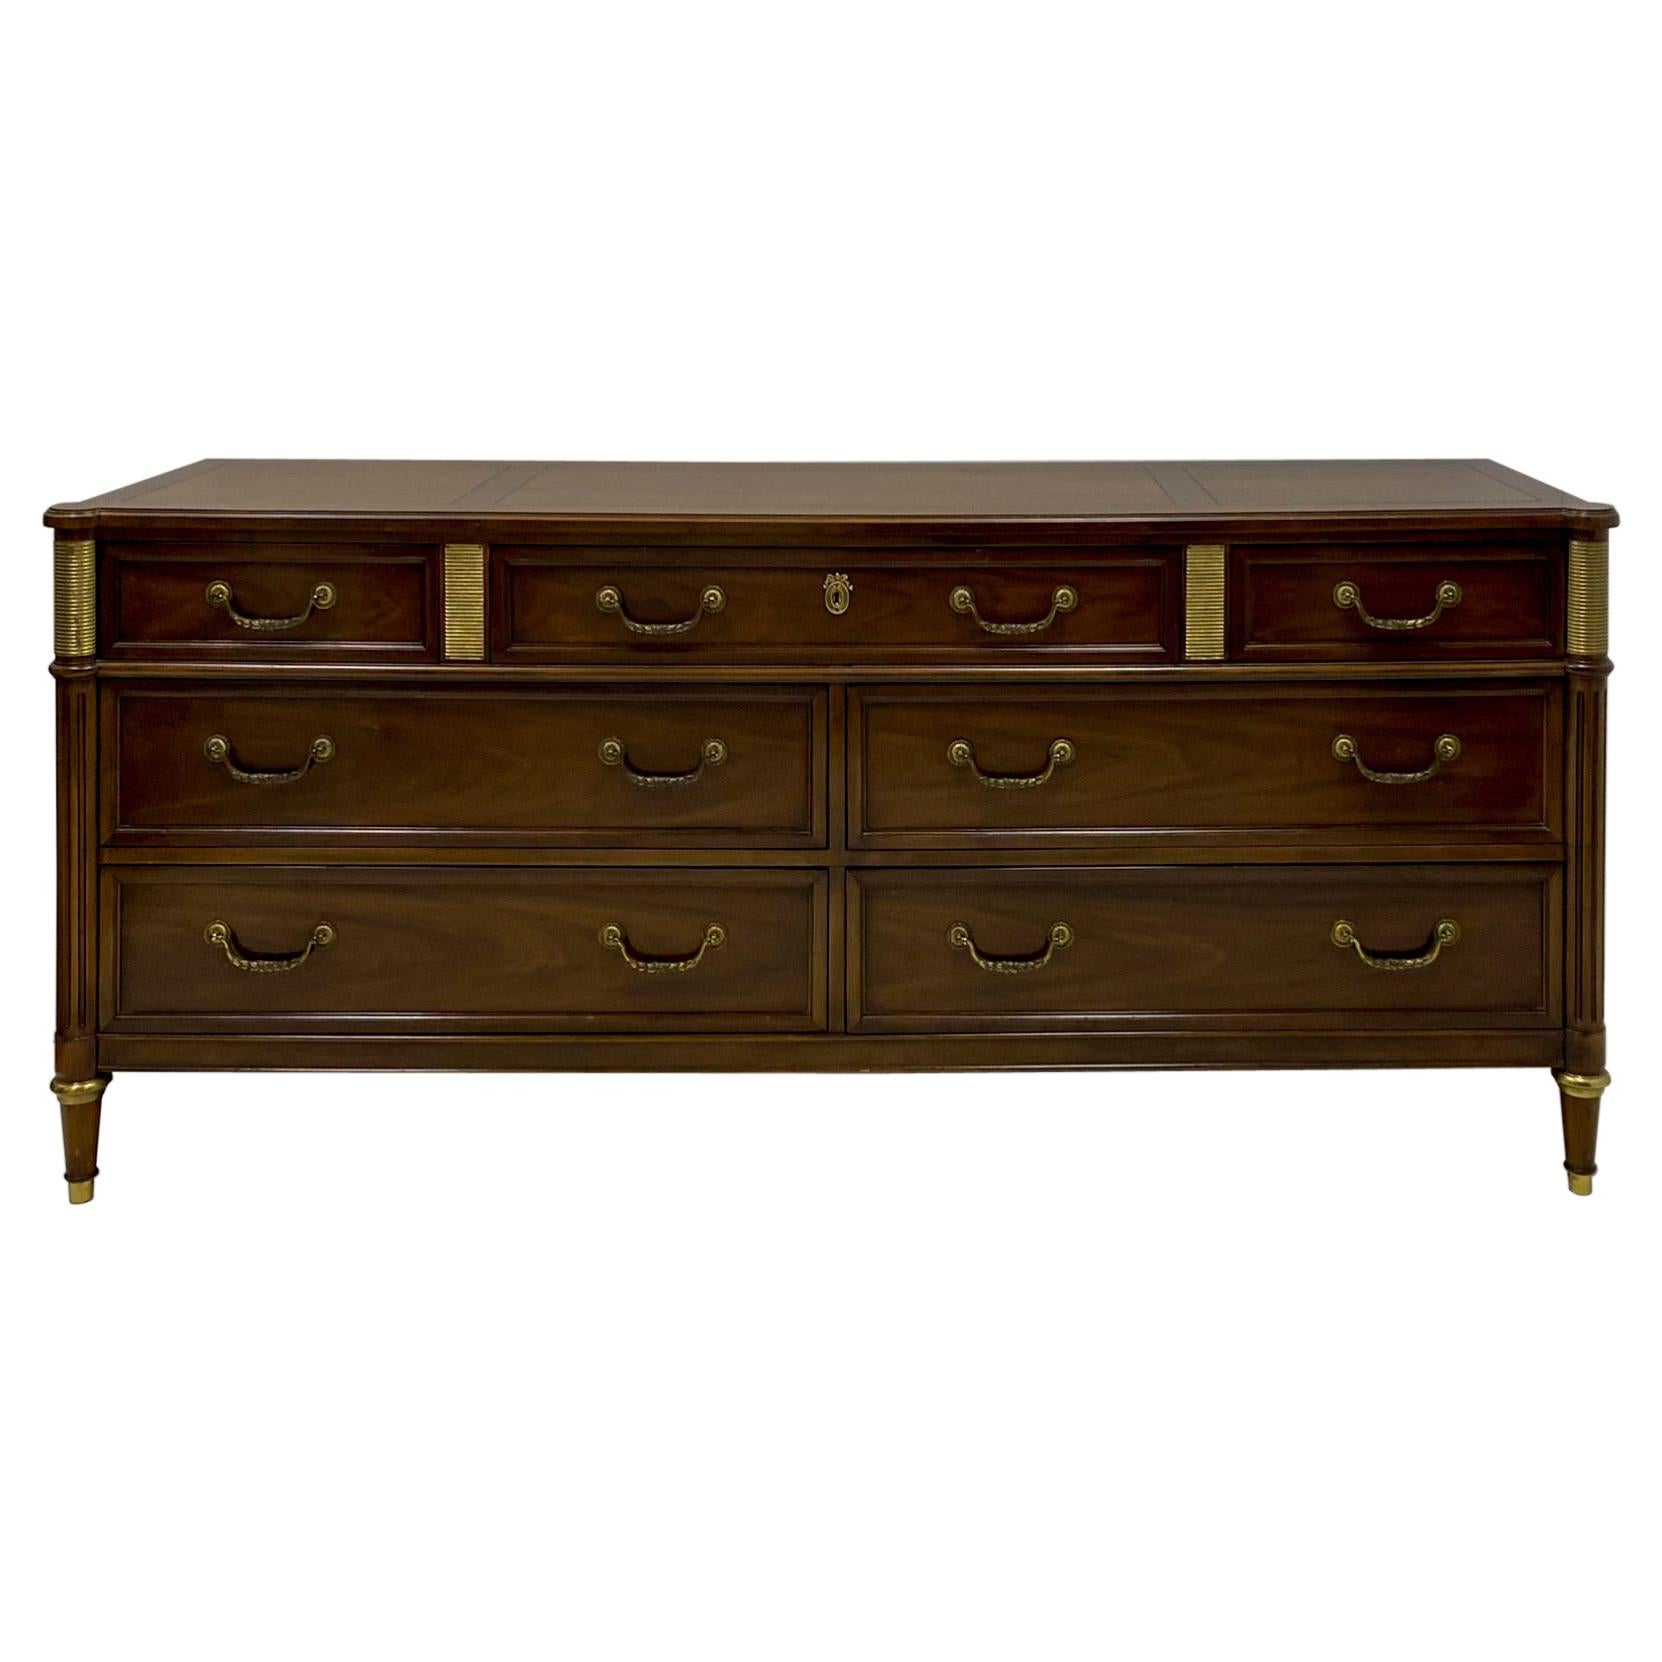 Louis XVI Style Mahogany Commode or Chest by Baker Furniture